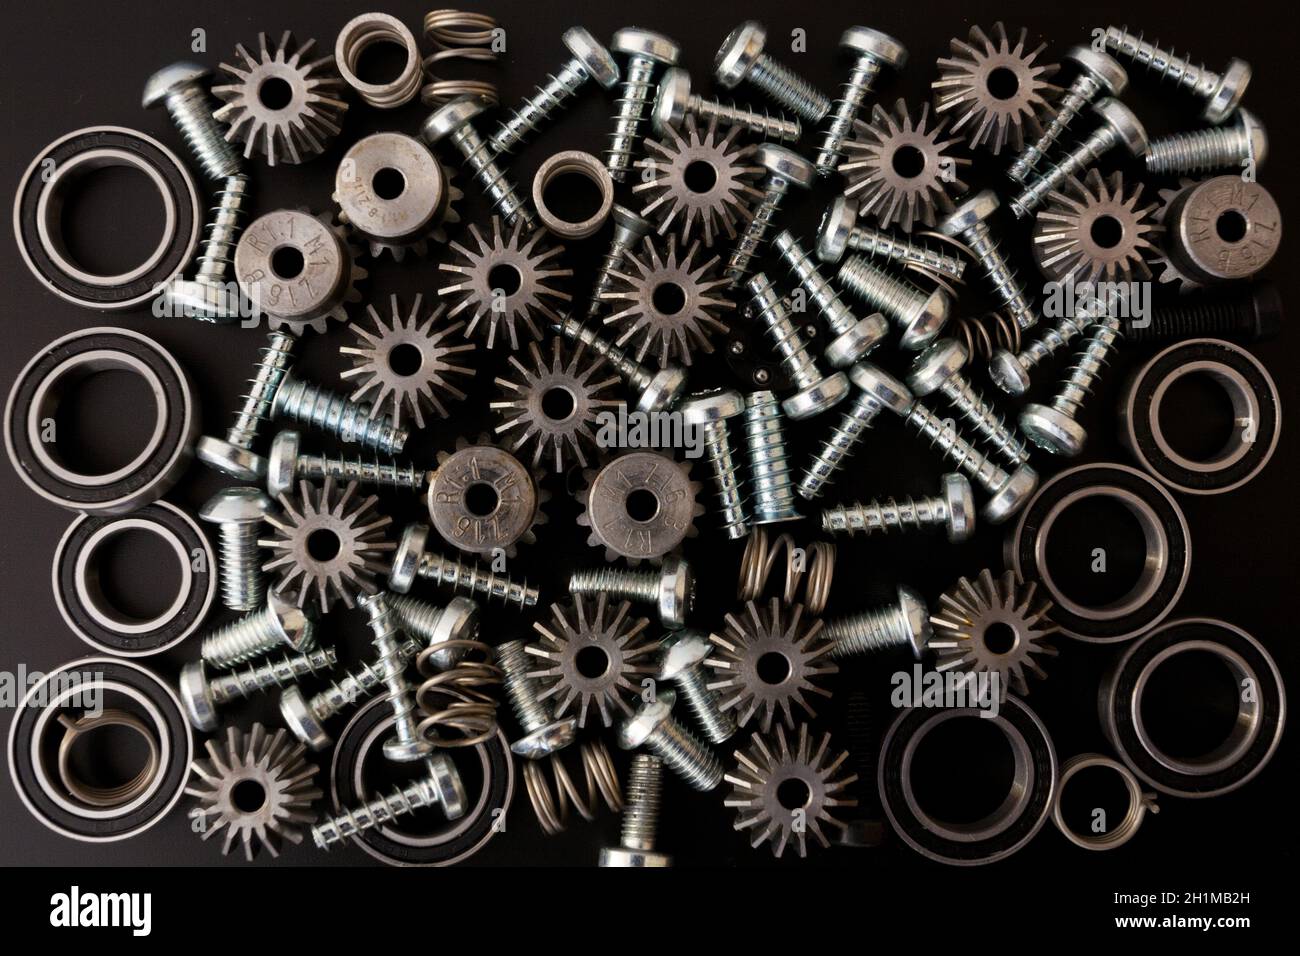 Background with mechanical components, gears, springs, screws, industrial objects Stock Photo